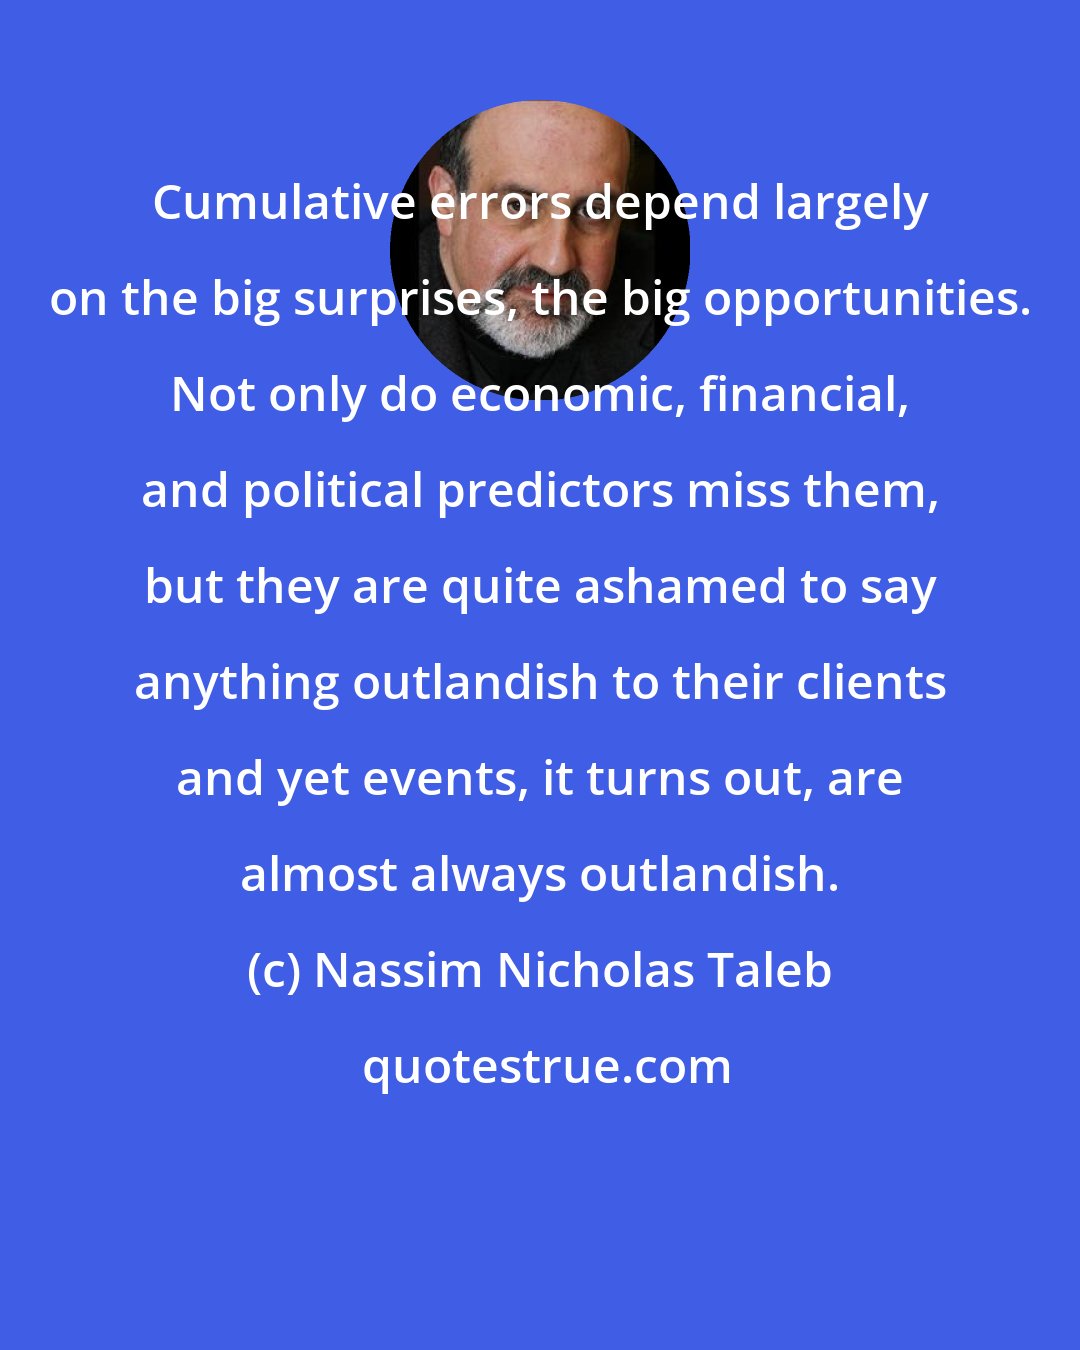 Nassim Nicholas Taleb: Cumulative errors depend largely on the big surprises, the big opportunities. Not only do economic, financial, and political predictors miss them, but they are quite ashamed to say anything outlandish to their clients and yet events, it turns out, are almost always outlandish.